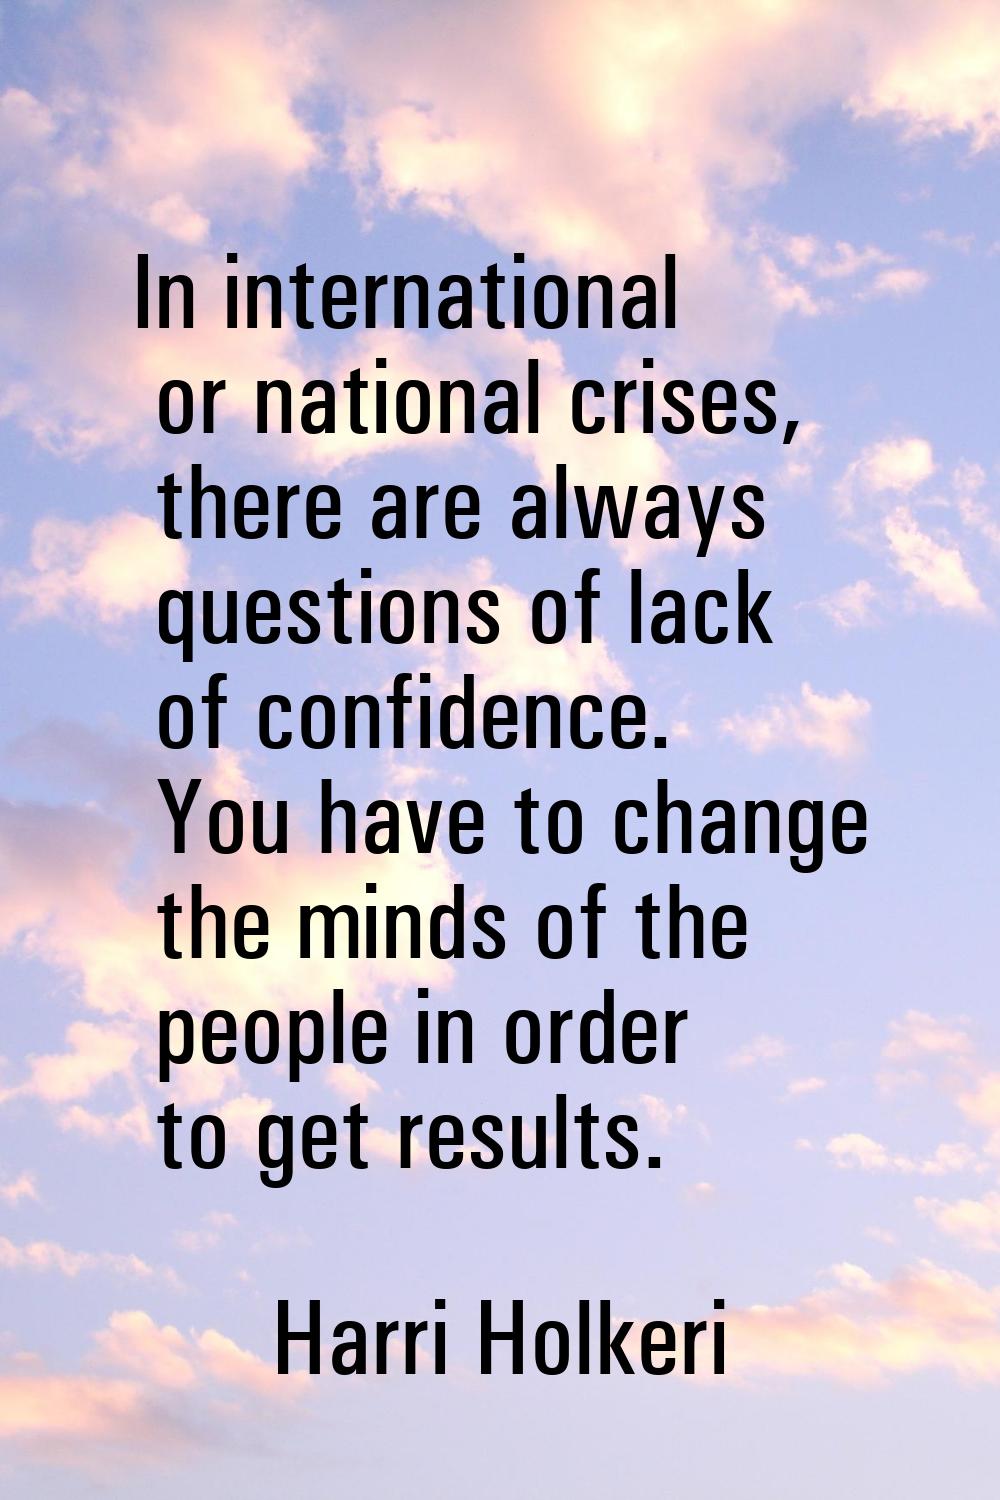 In international or national crises, there are always questions of lack of confidence. You have to 